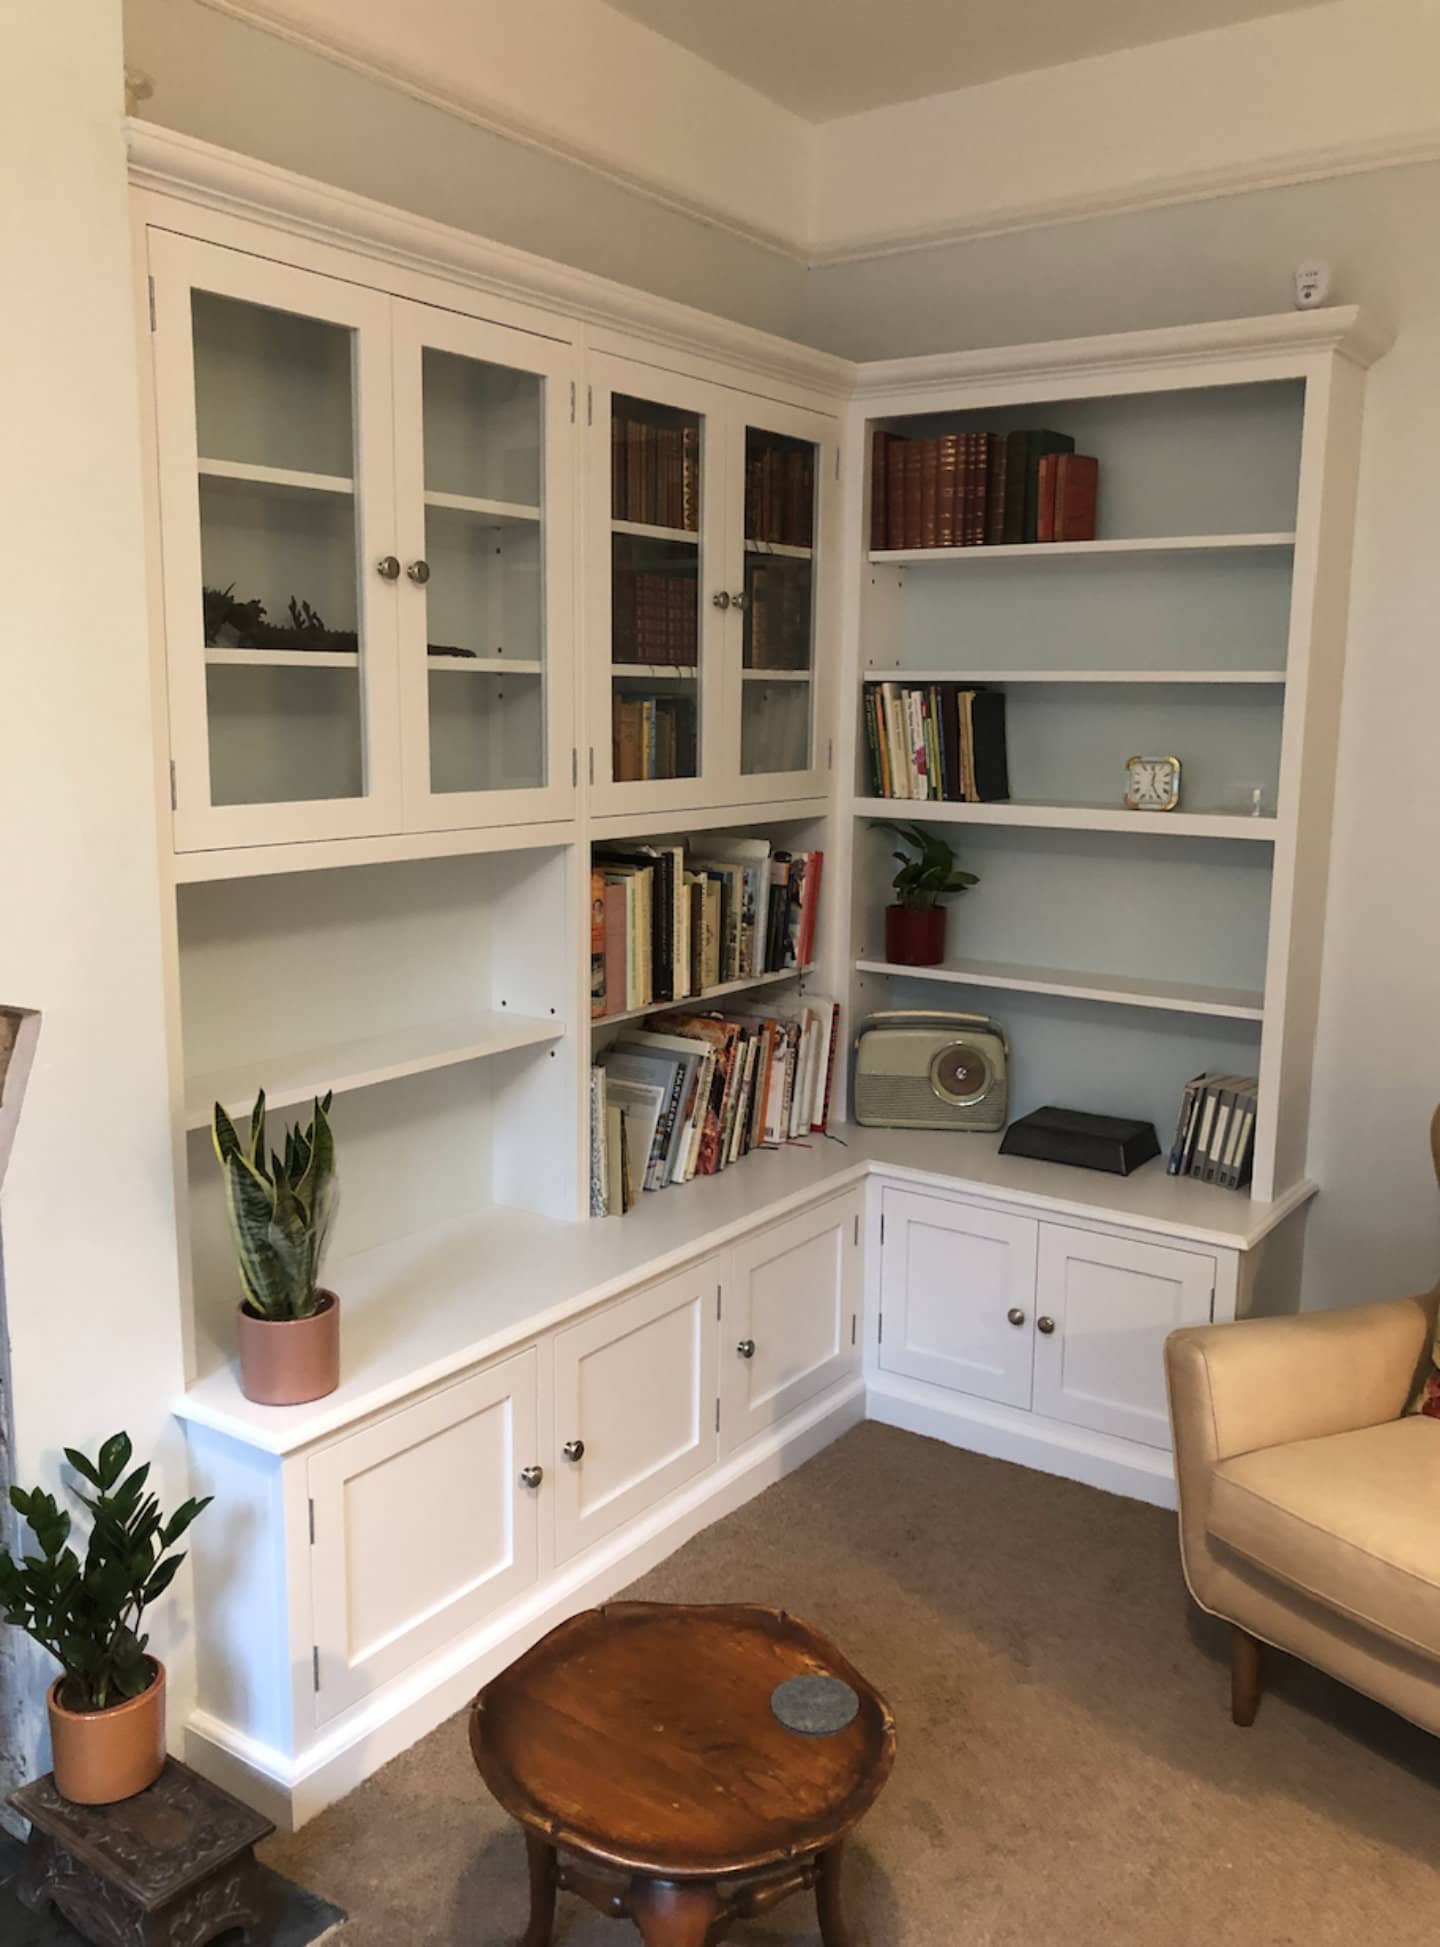 A bespoke corner bookcase with books and ornaments place upon it.